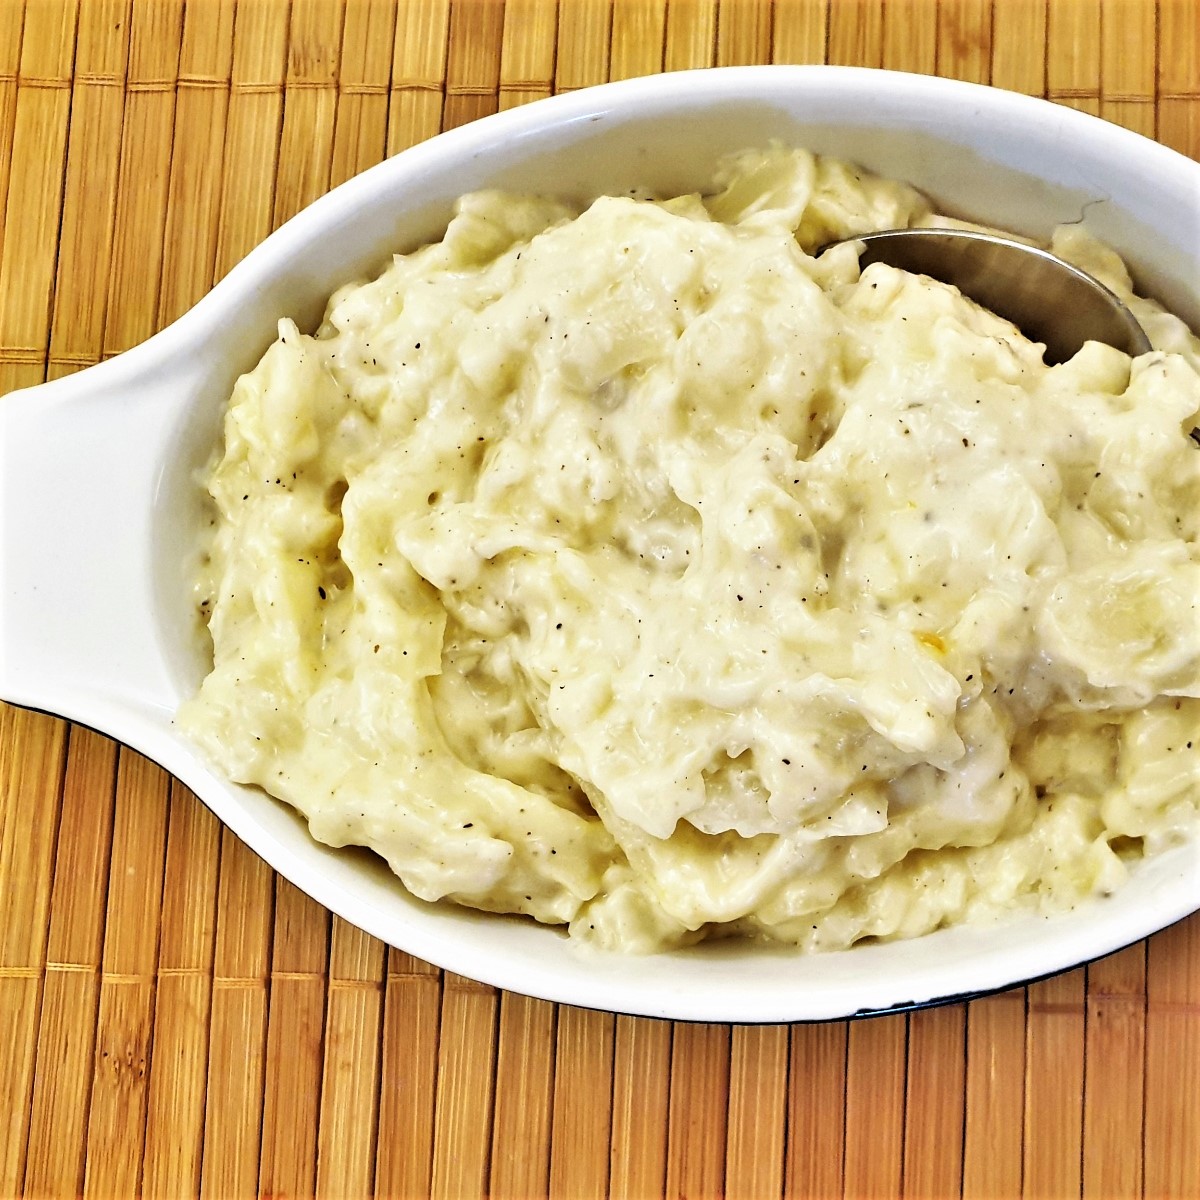 A dish of creamed cabbage with a spoon.